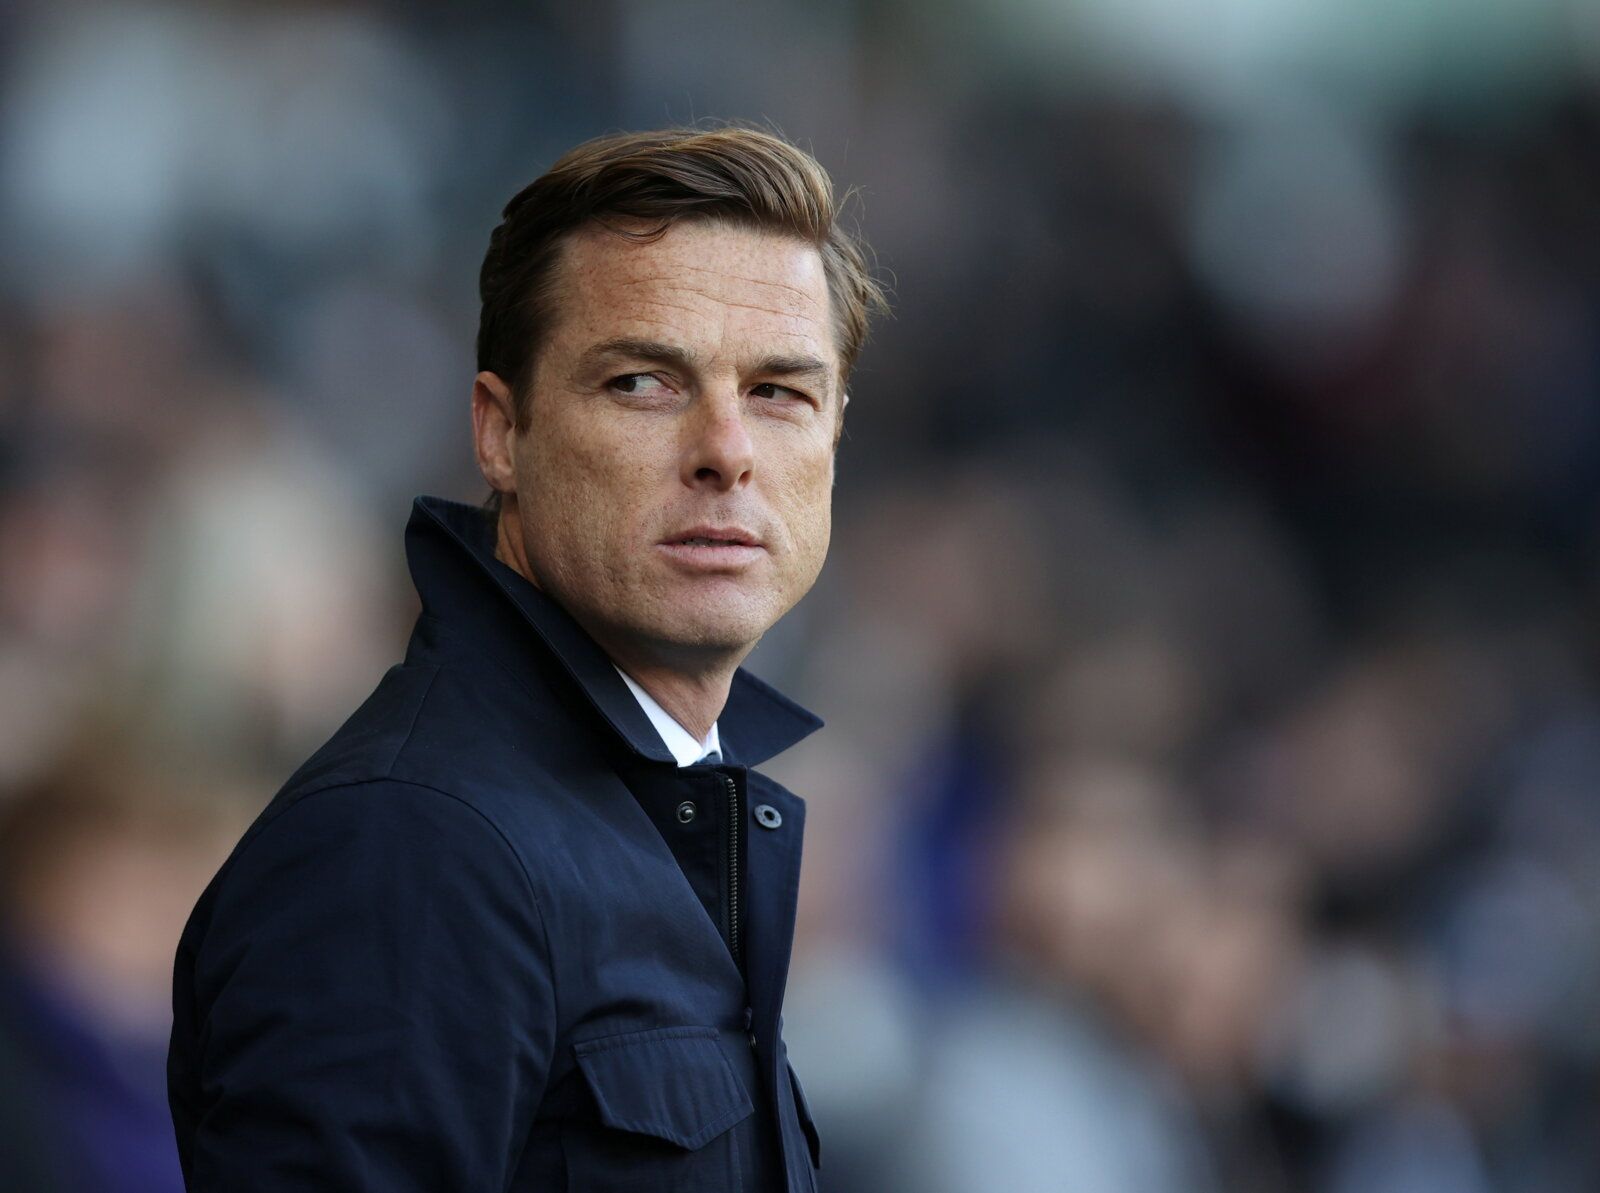 Soccer Football - Championship - Derby County v AFC Bournemouth - Pride Park, Derby, Britain - November 21, 2021 Bournemouth manager Scott Parker before the match  Molly Darlington/Action Images